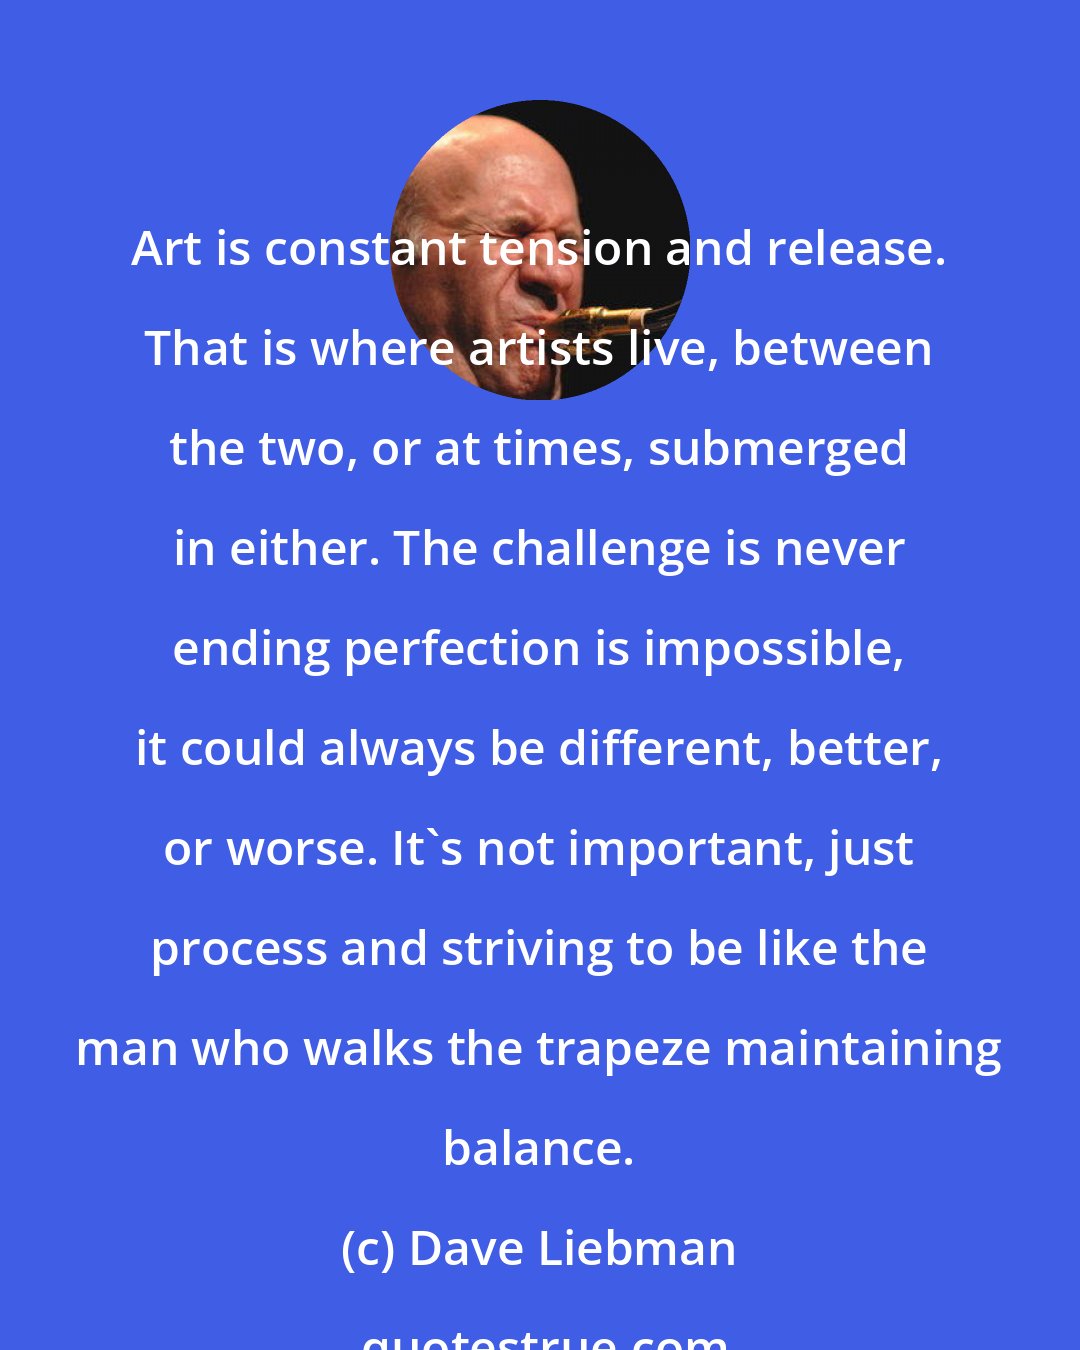 Dave Liebman: Art is constant tension and release. That is where artists live, between the two, or at times, submerged in either. The challenge is never ending perfection is impossible, it could always be different, better, or worse. It's not important, just process and striving to be like the man who walks the trapeze maintaining balance.